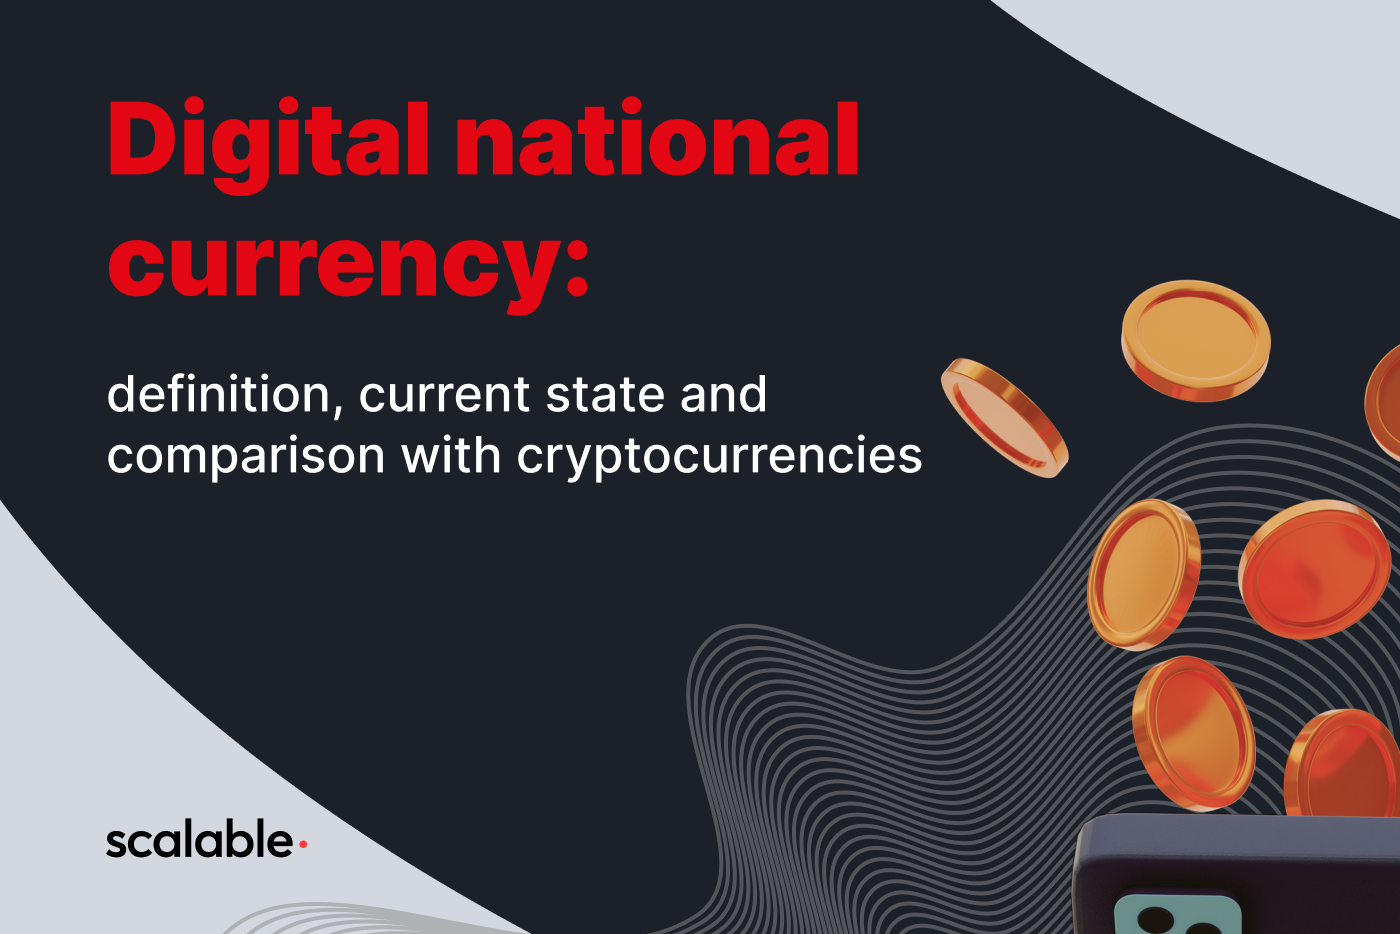 Digital national currency: definition, current state and comparison with cryptocurrencies